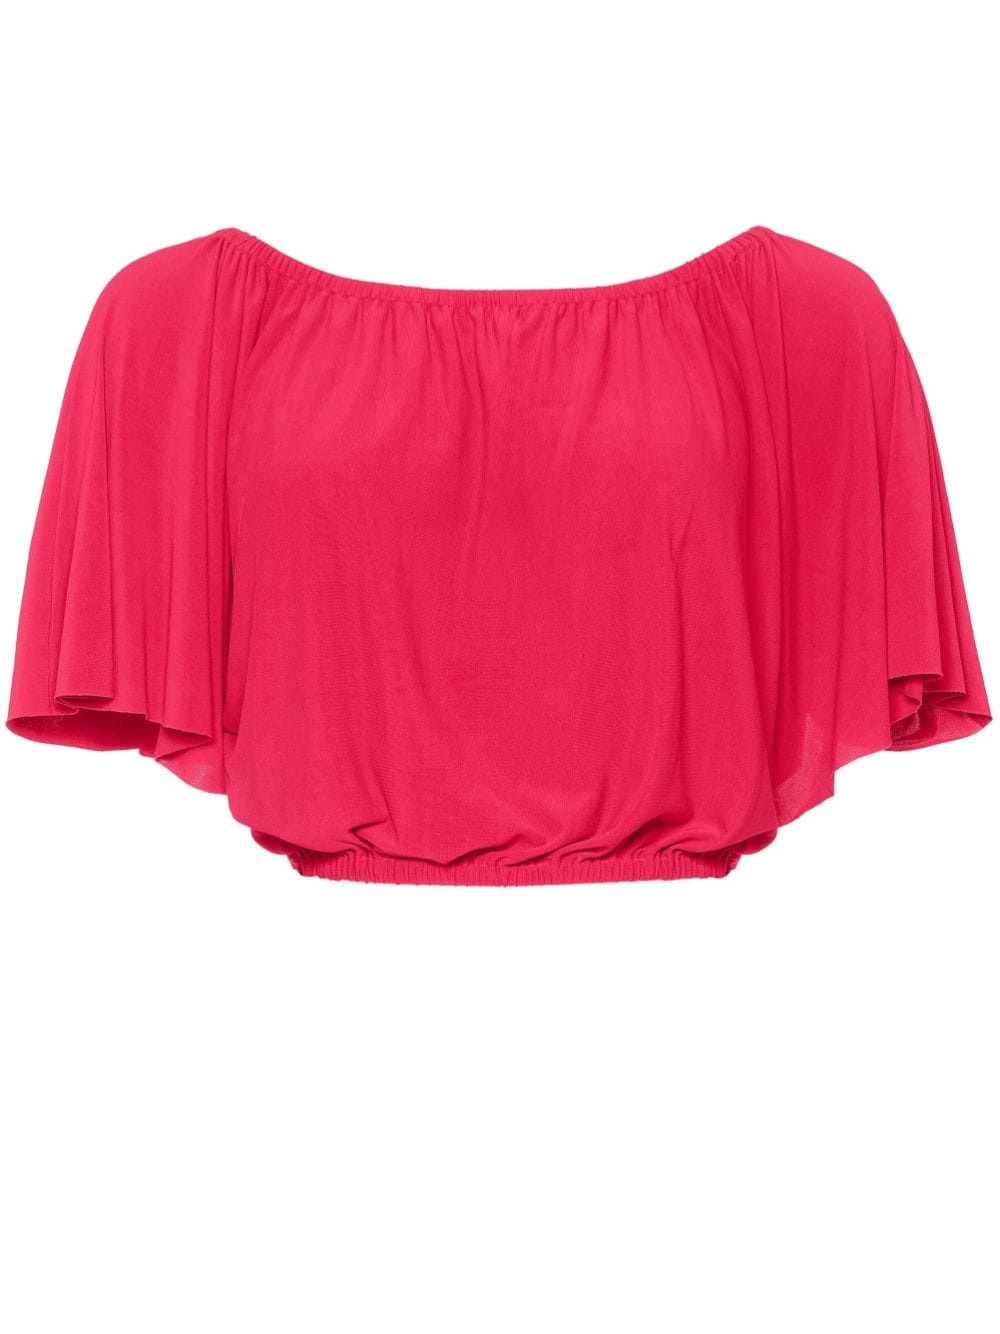 Solal cropped top - 1